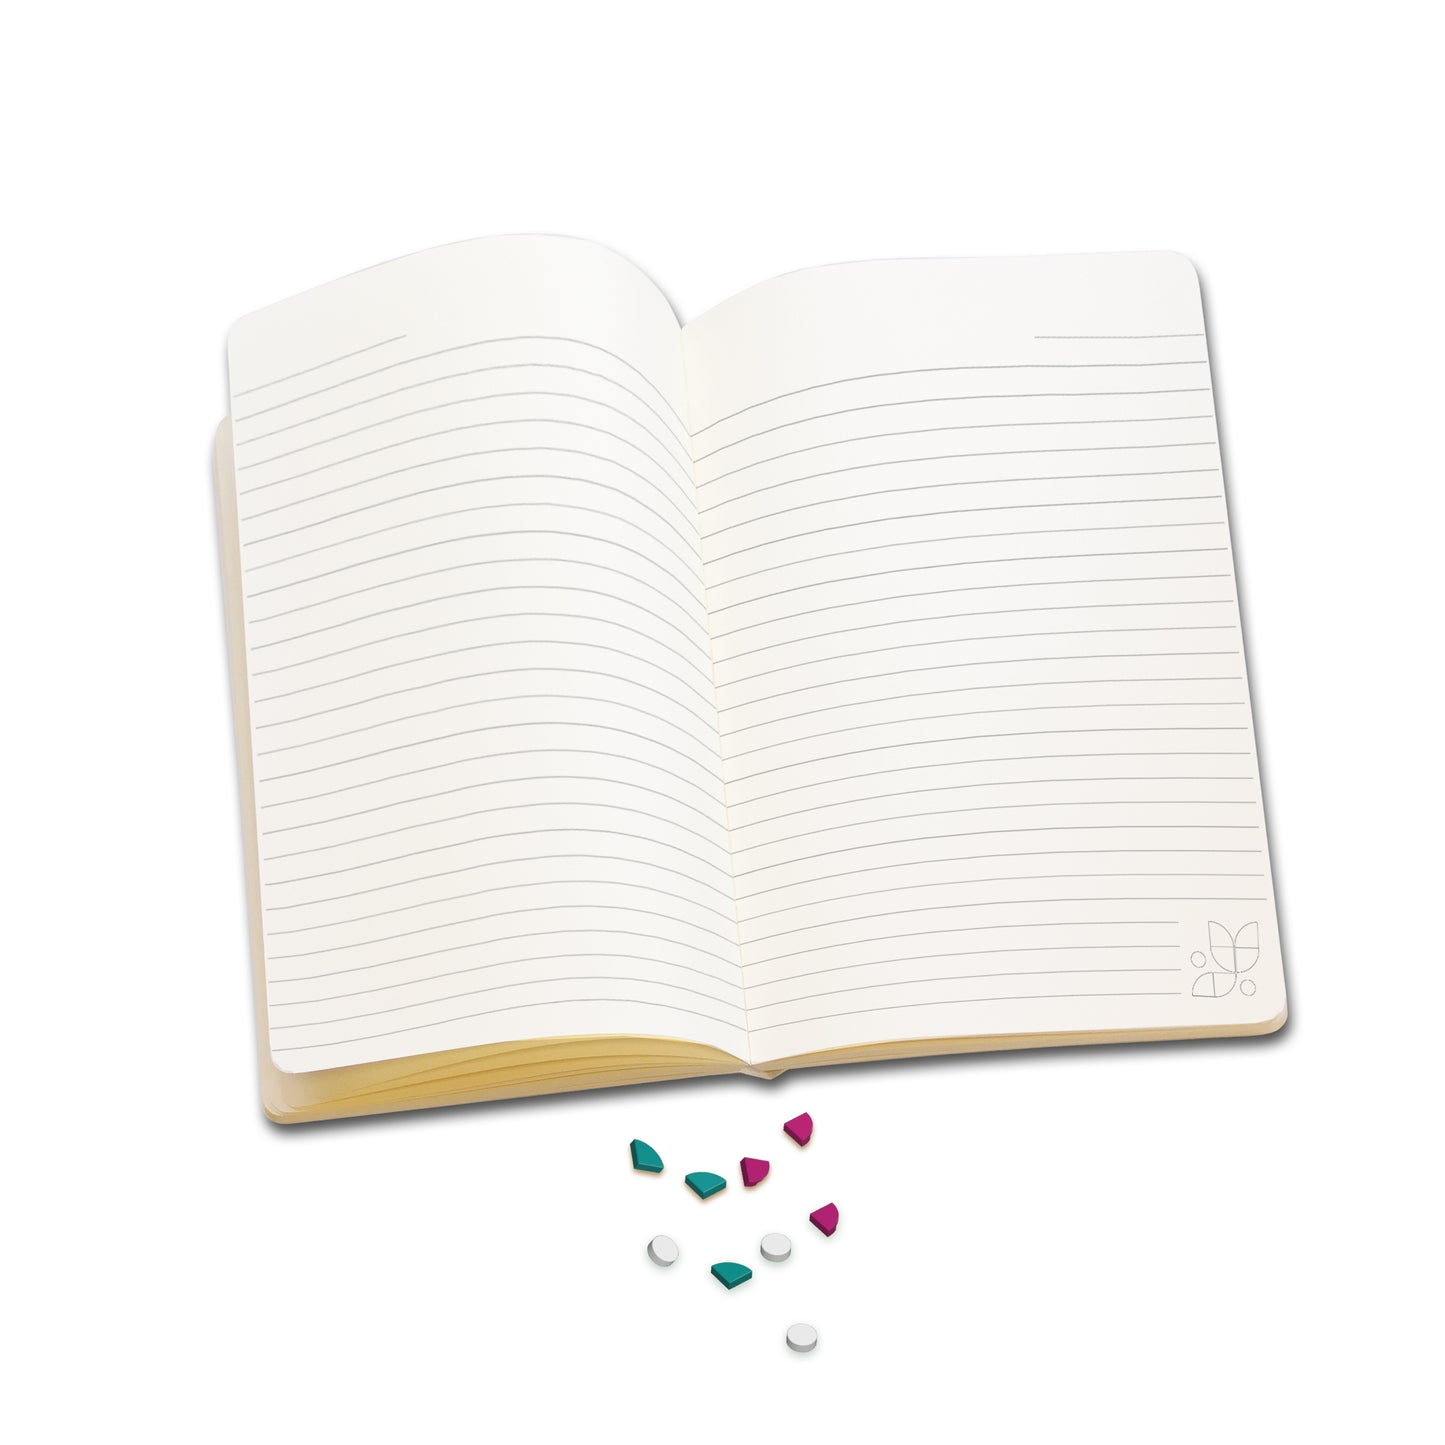 IQ LEGO® DOTS™ Notebook with Sliding Charm (52796)